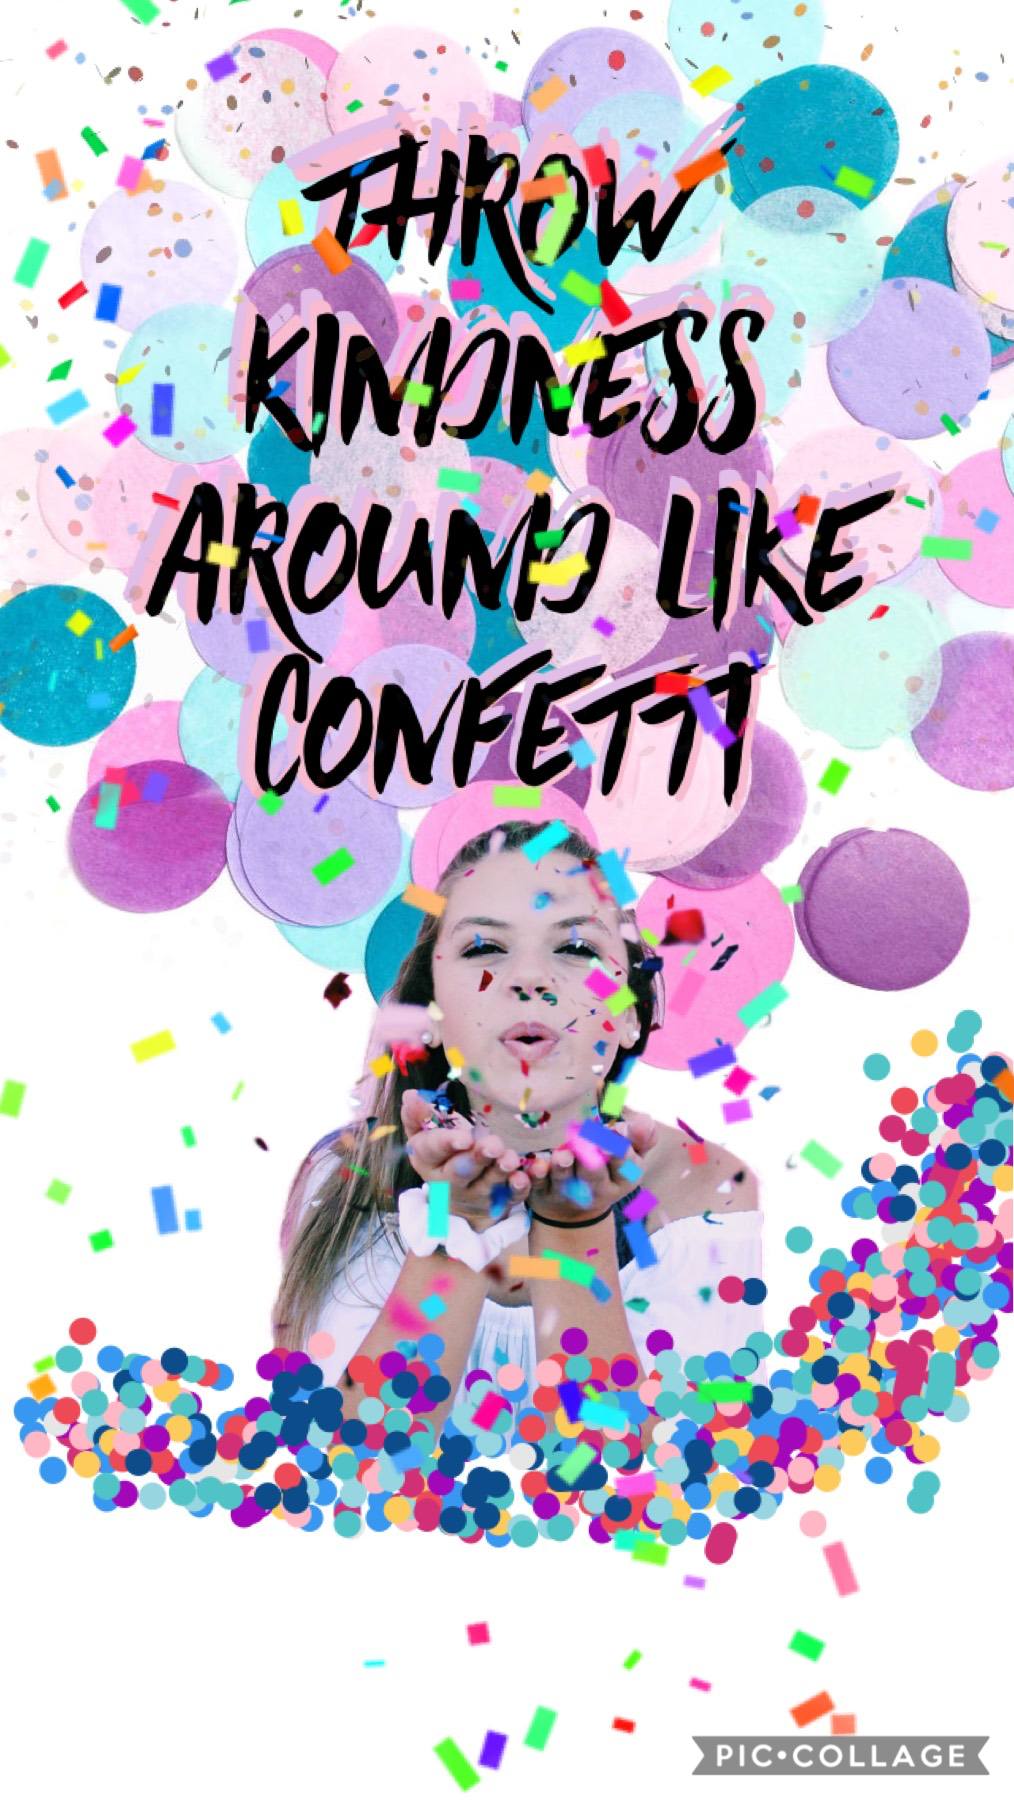 Tappy

Throw Kindness around like confetti!

Follow my new collab account -Vote4You-!!!